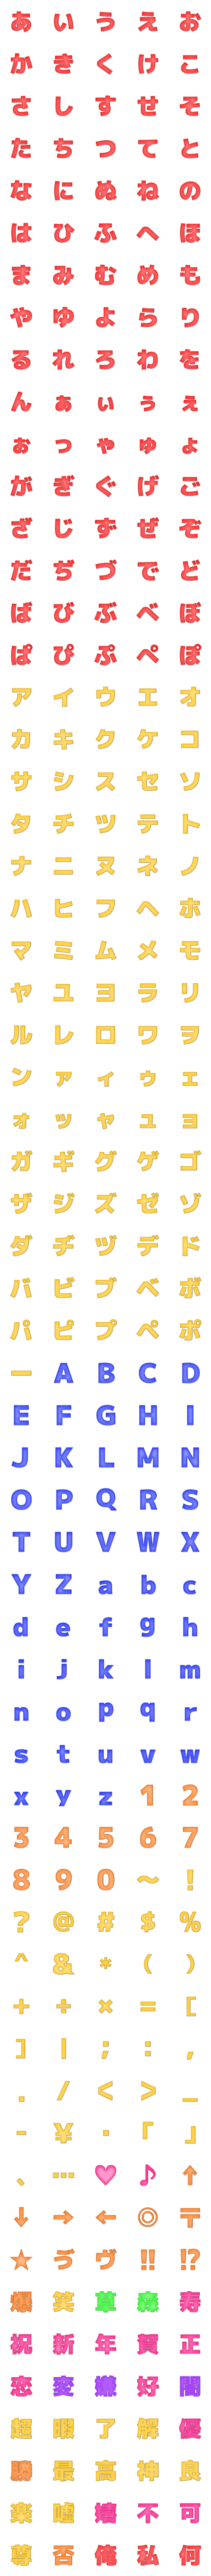 [LINE絵文字]アクリル板風デコ文字 -ゴシック体-の画像一覧